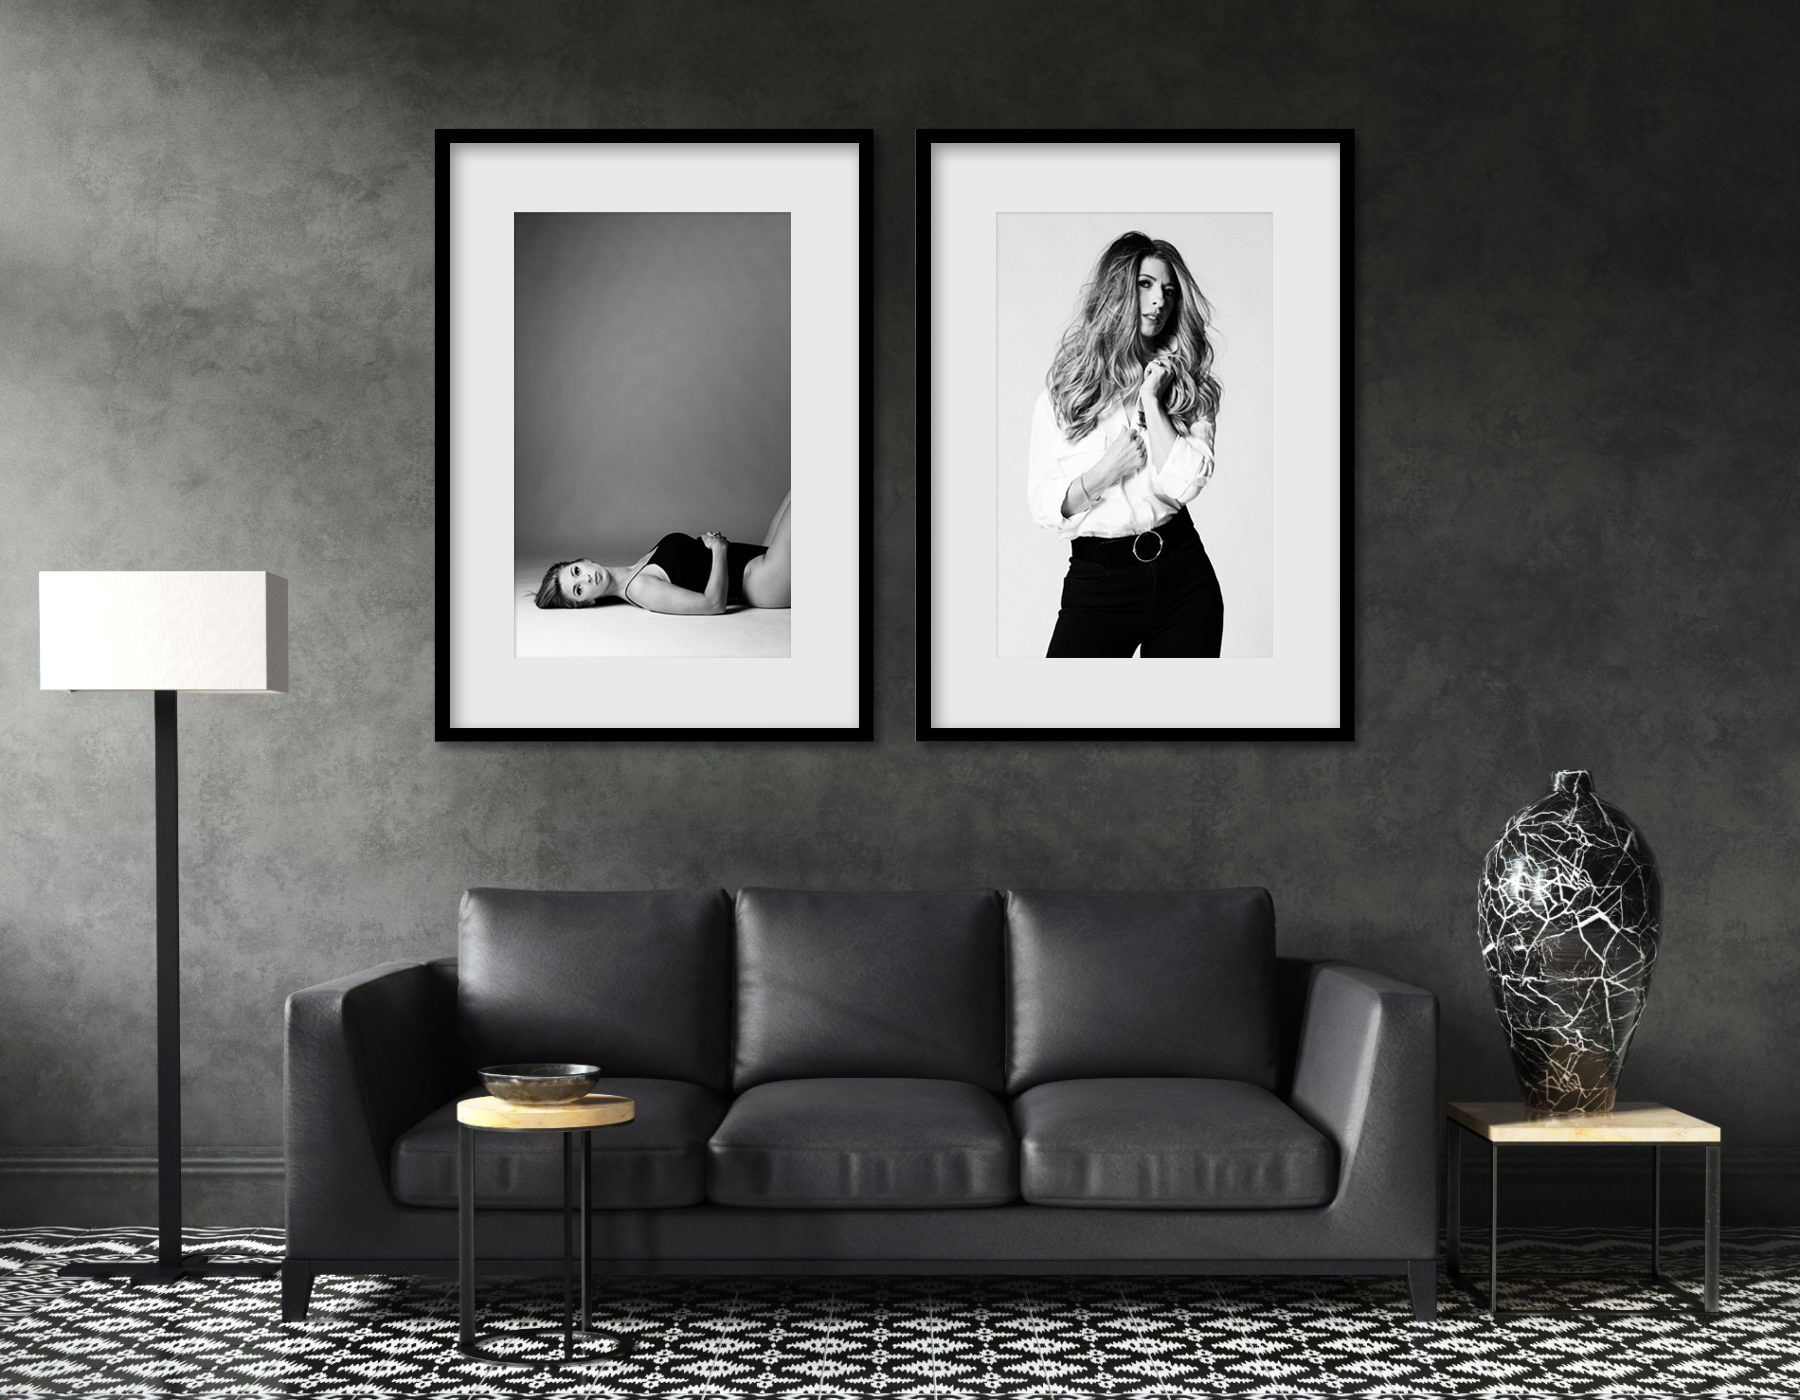 An example of framed portrait wall art in a modern room.